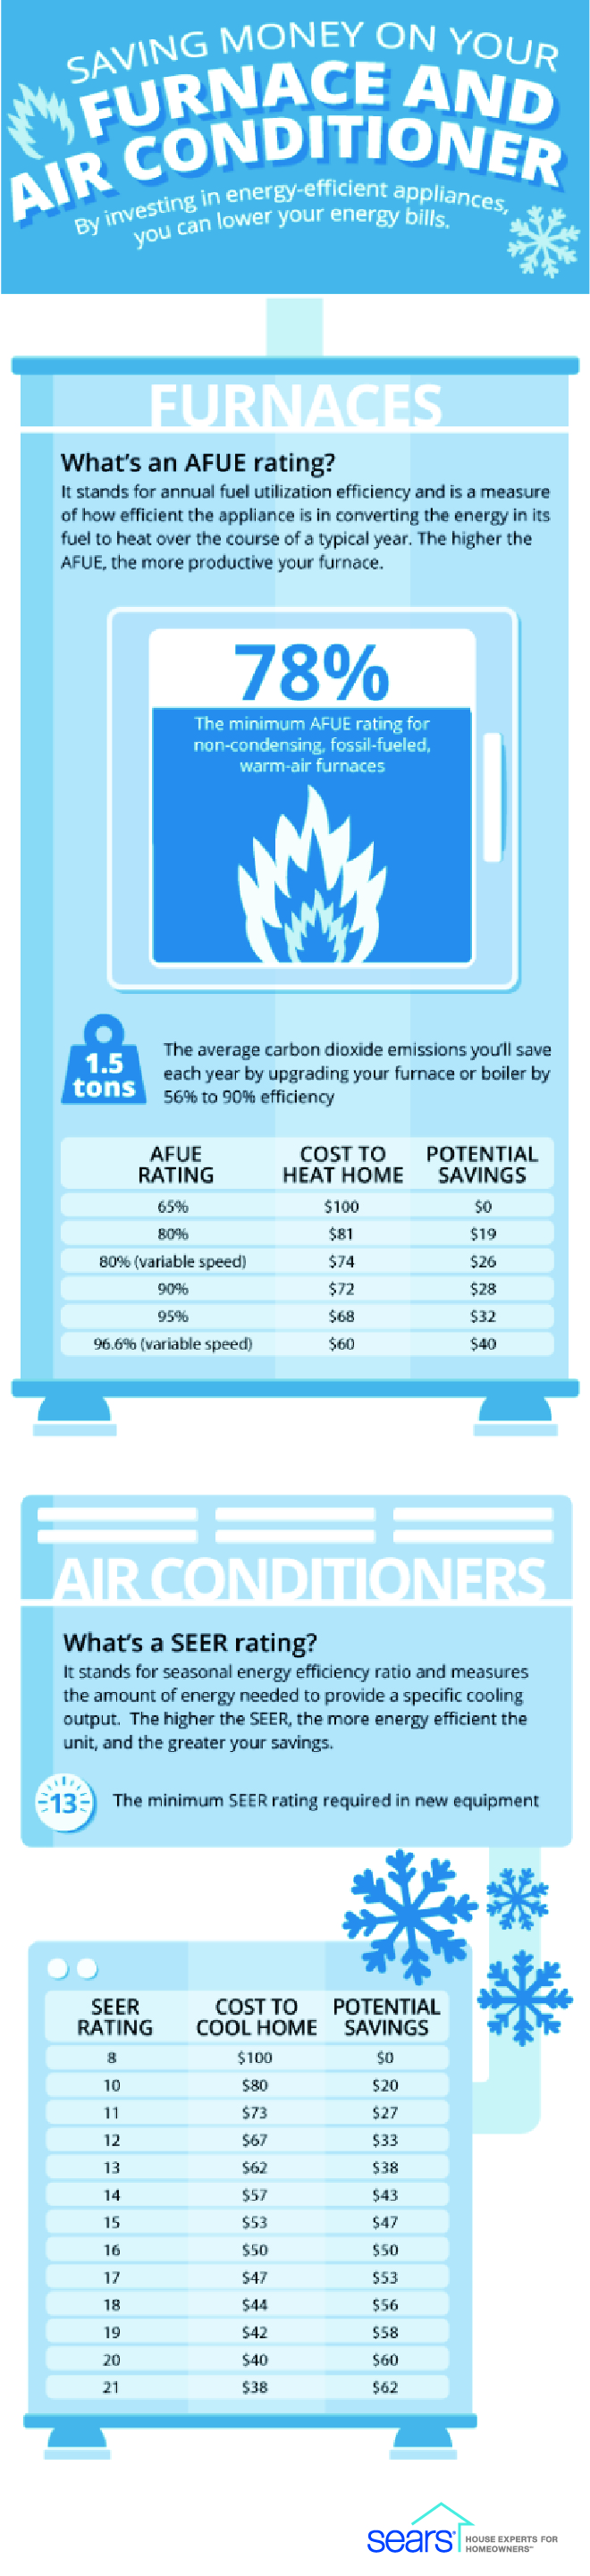 energy savings from furnaces and air conditioners